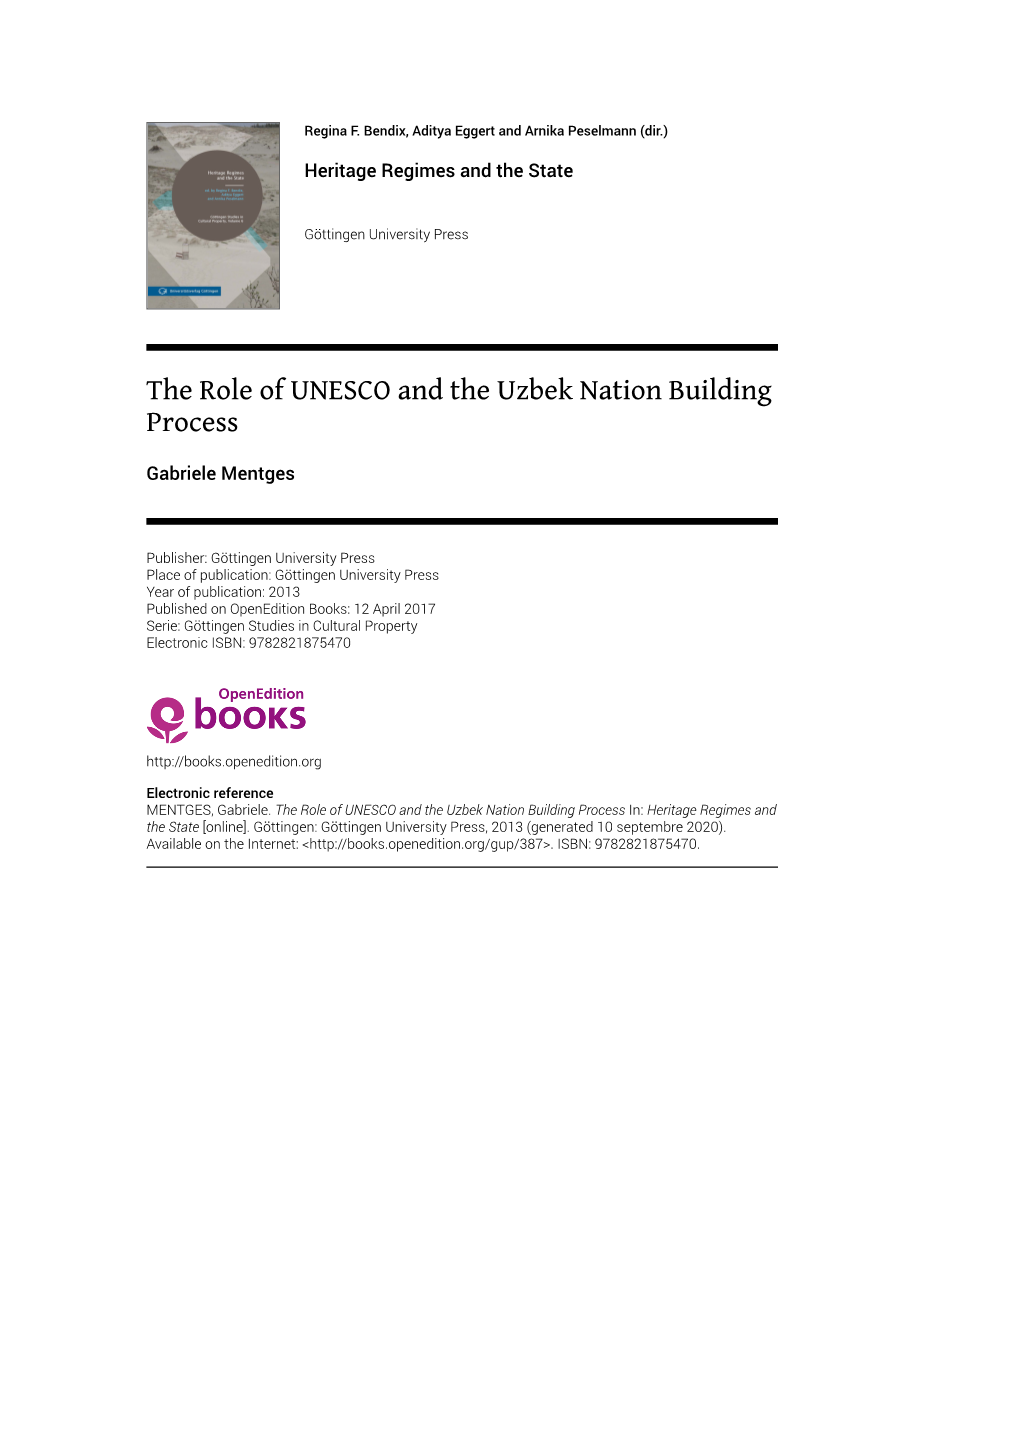 The Role of UNESCO and the Uzbek Nation Building Process